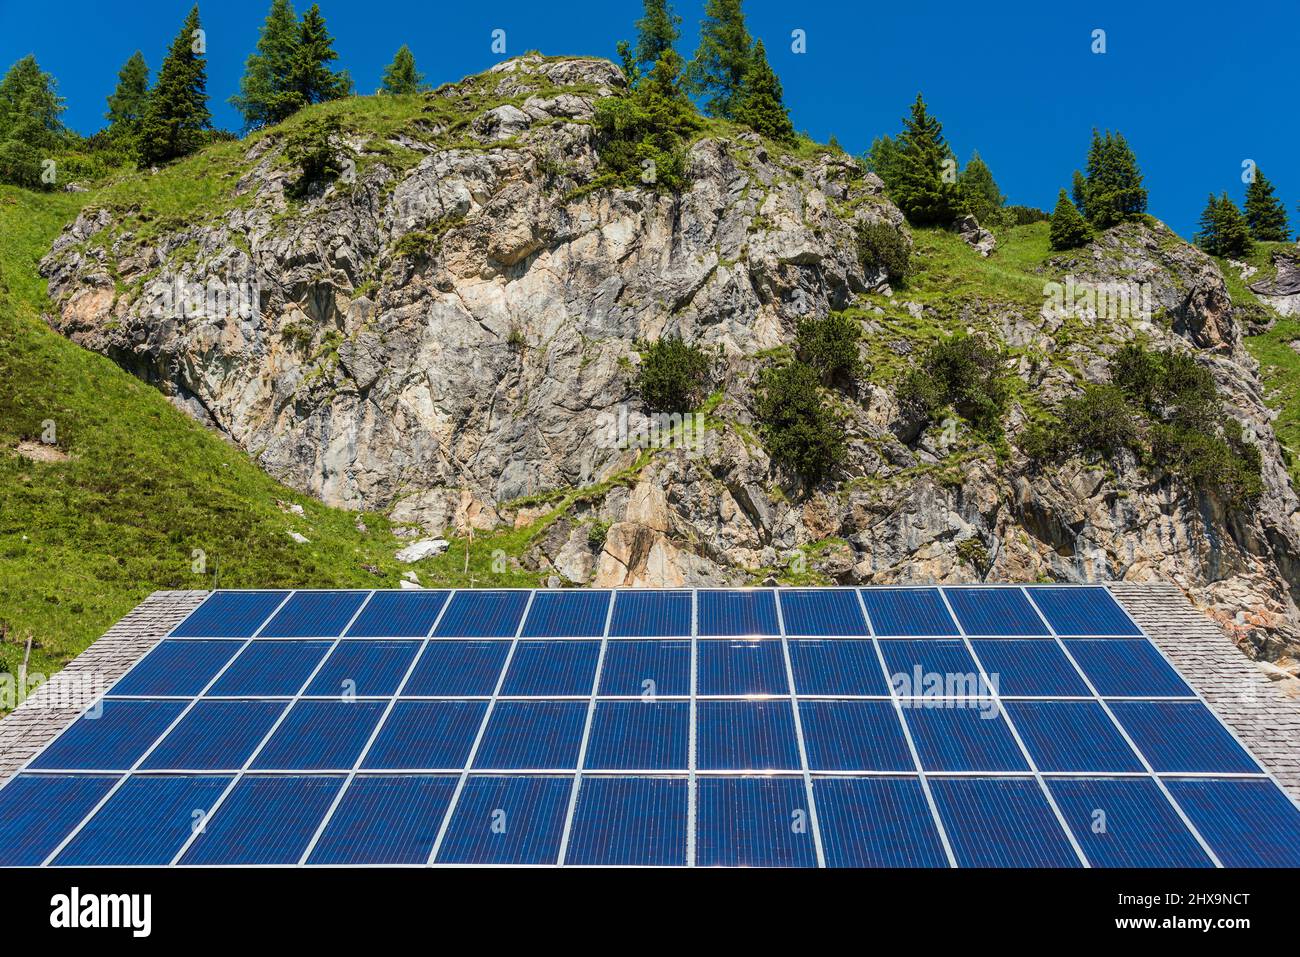 Solar photovoltaic panels against the backdrop of rocky mountains covered with green plants and trees Stock Photo